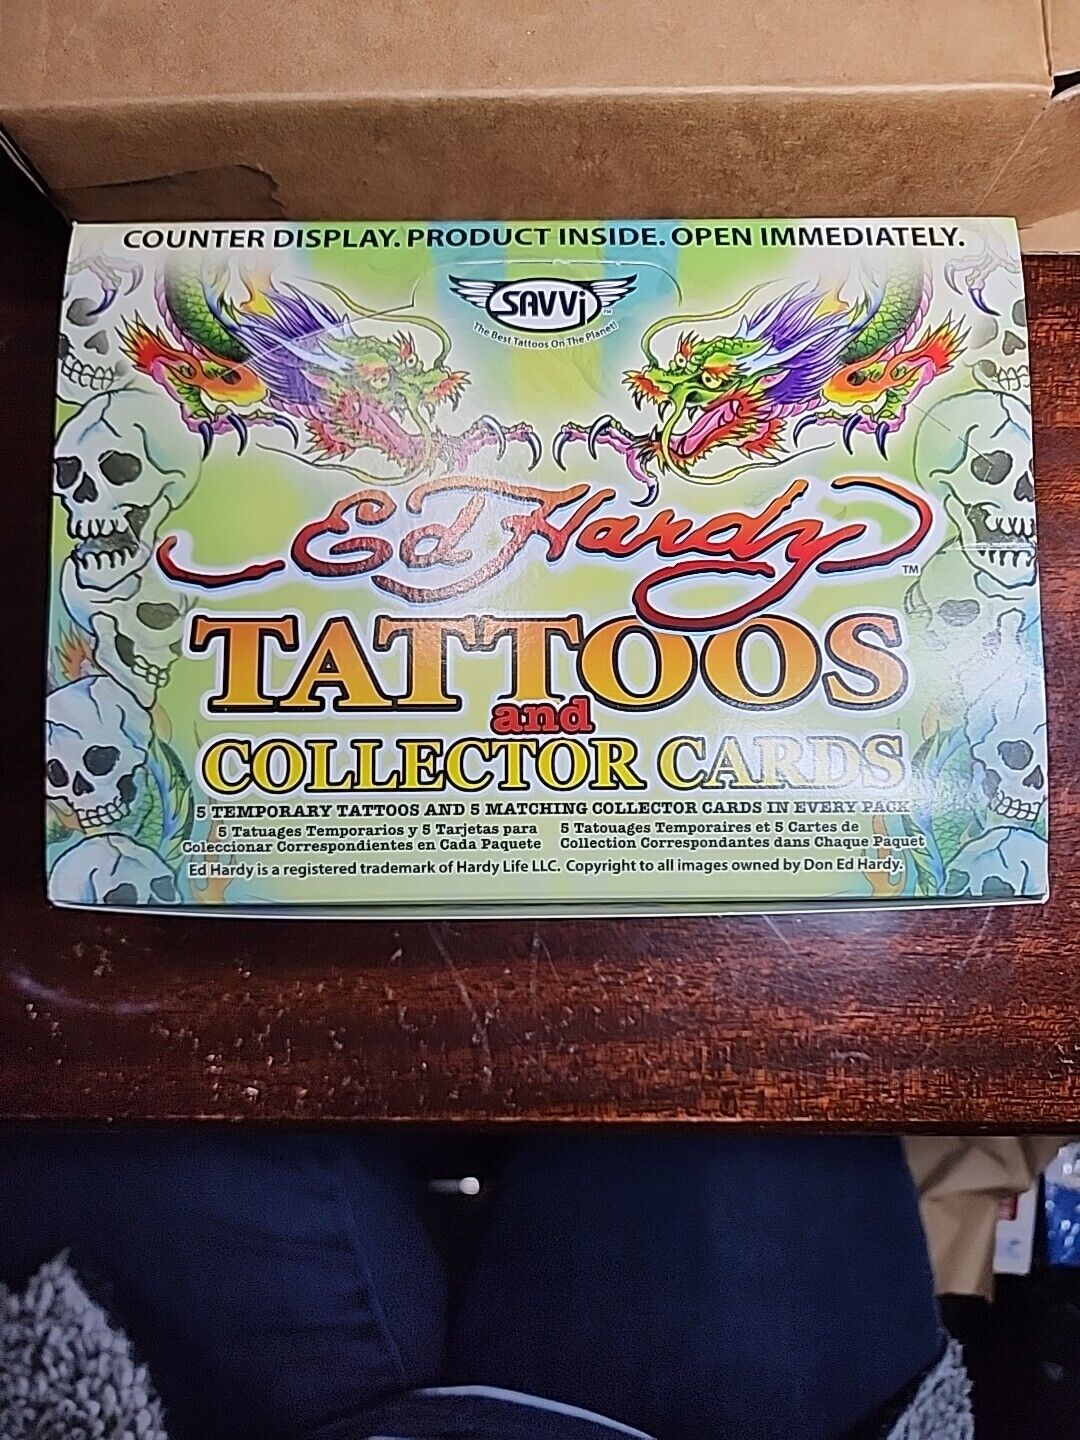 ED HARDY. Temporary tattoos and matching Collector Cards